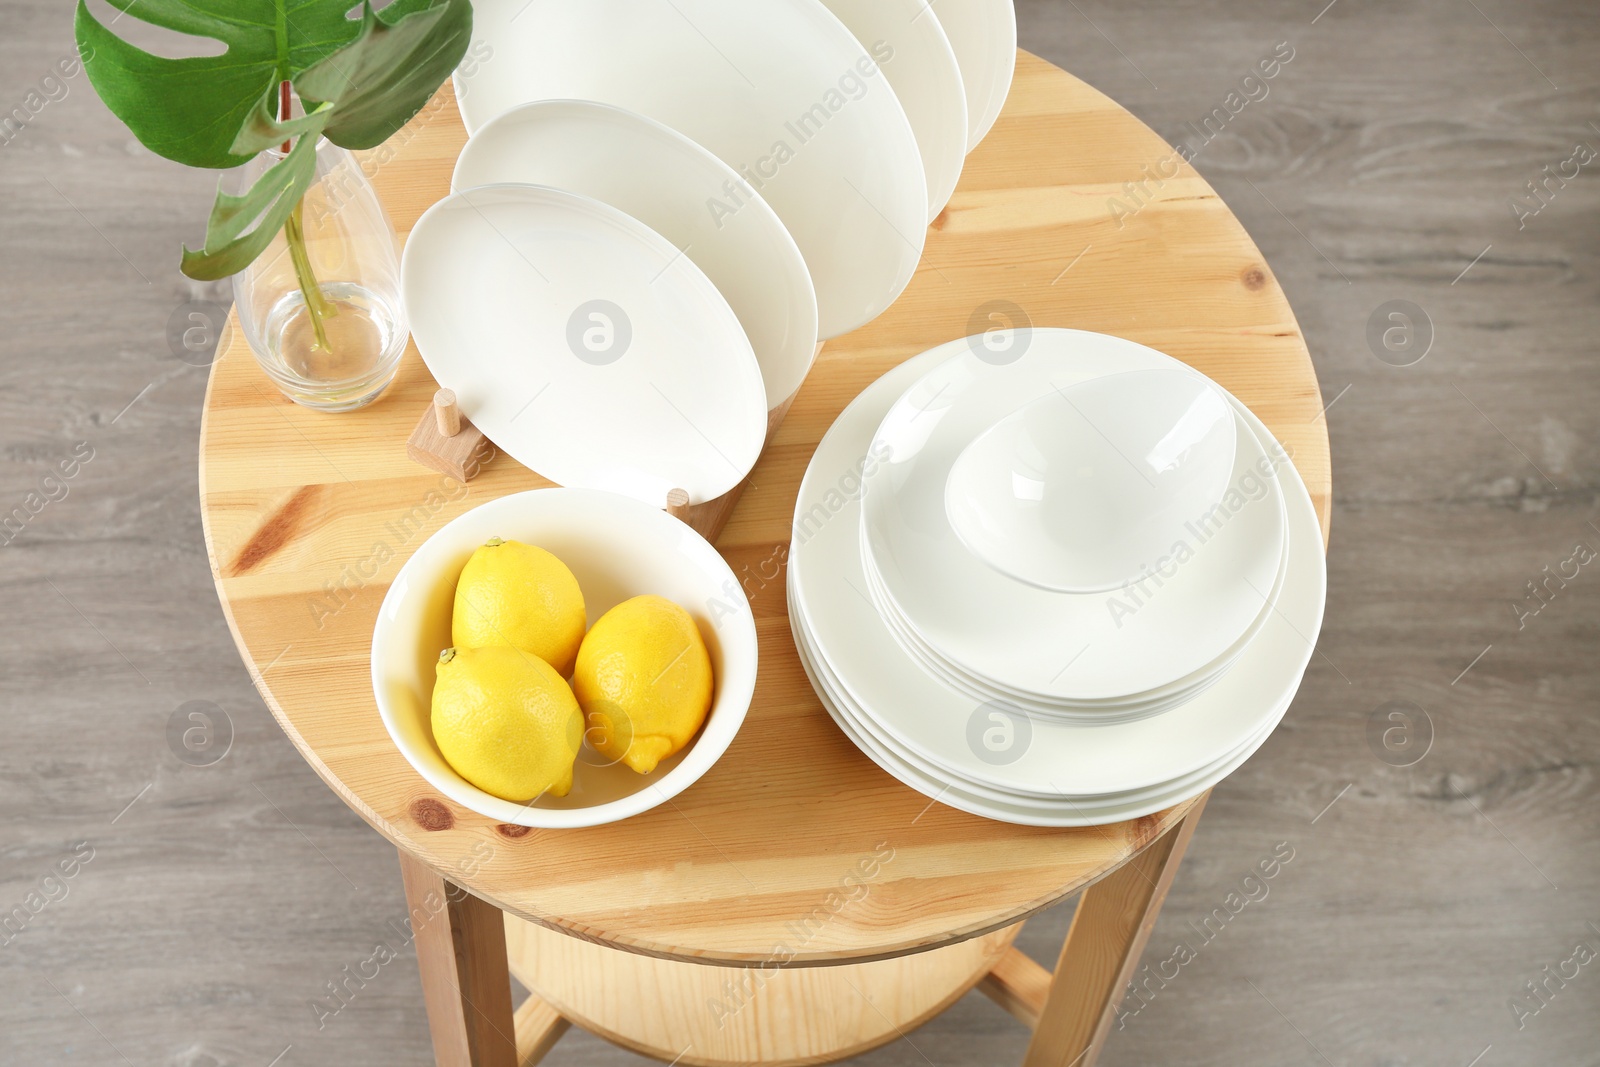 Photo of Different clean tableware on wooden table in kitchen